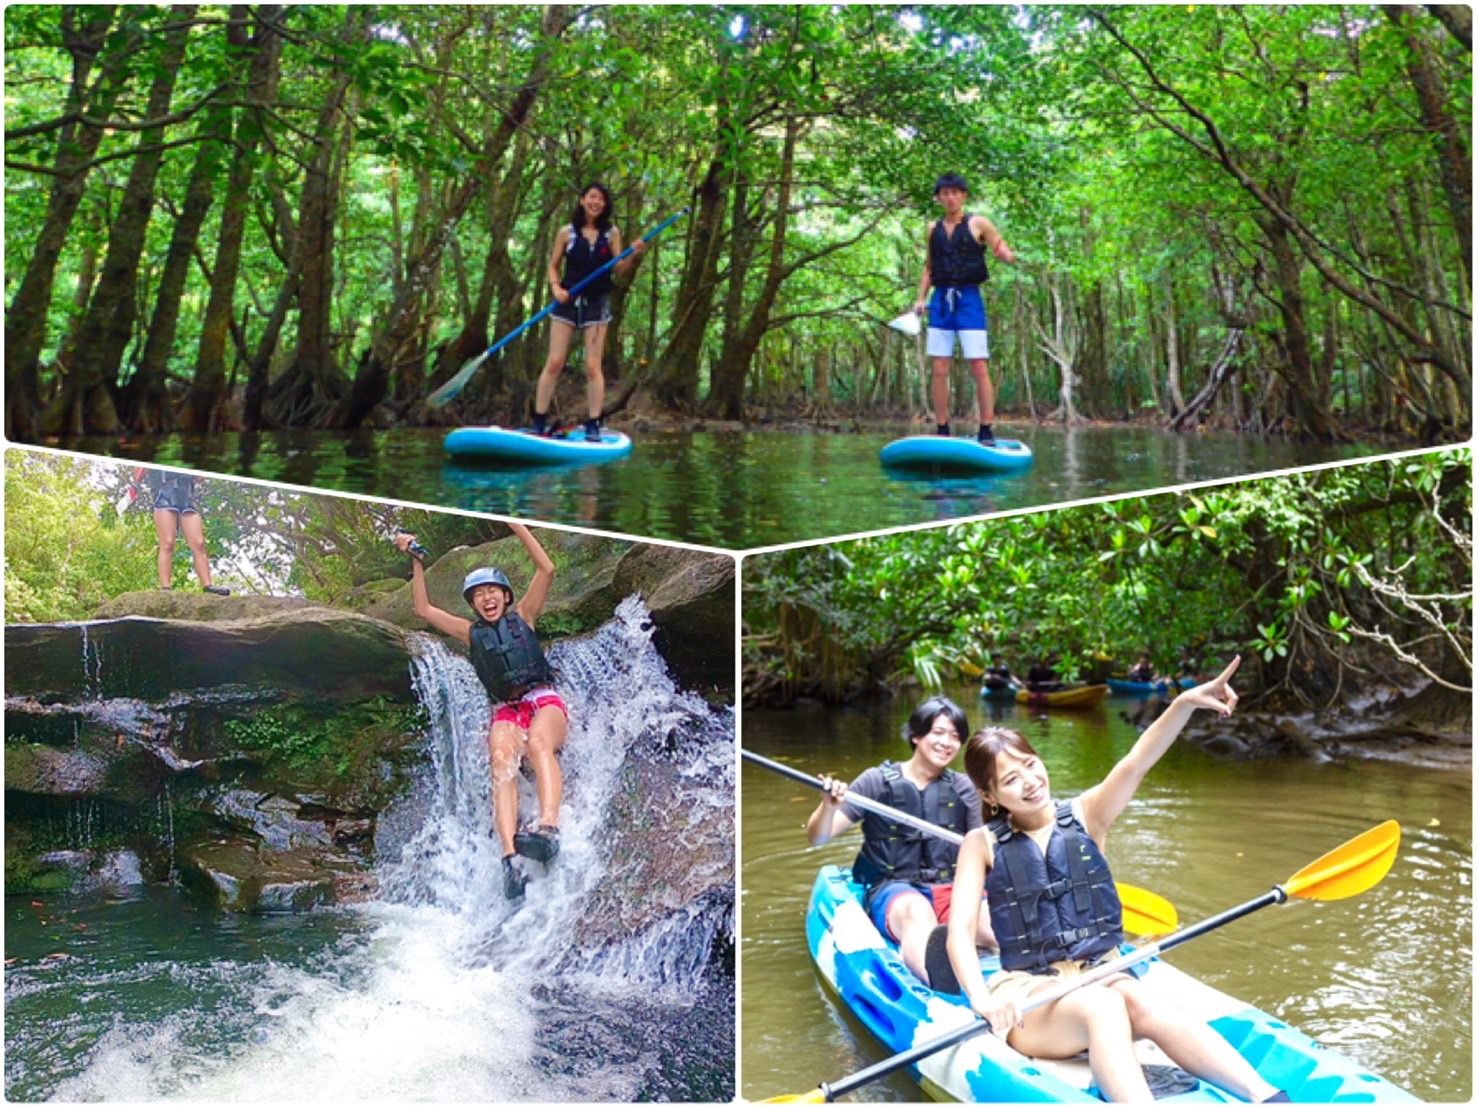 Imagen del tour: Iriomote Island Splash Canyoning and SUP or Canoe at Mangrove Forest 